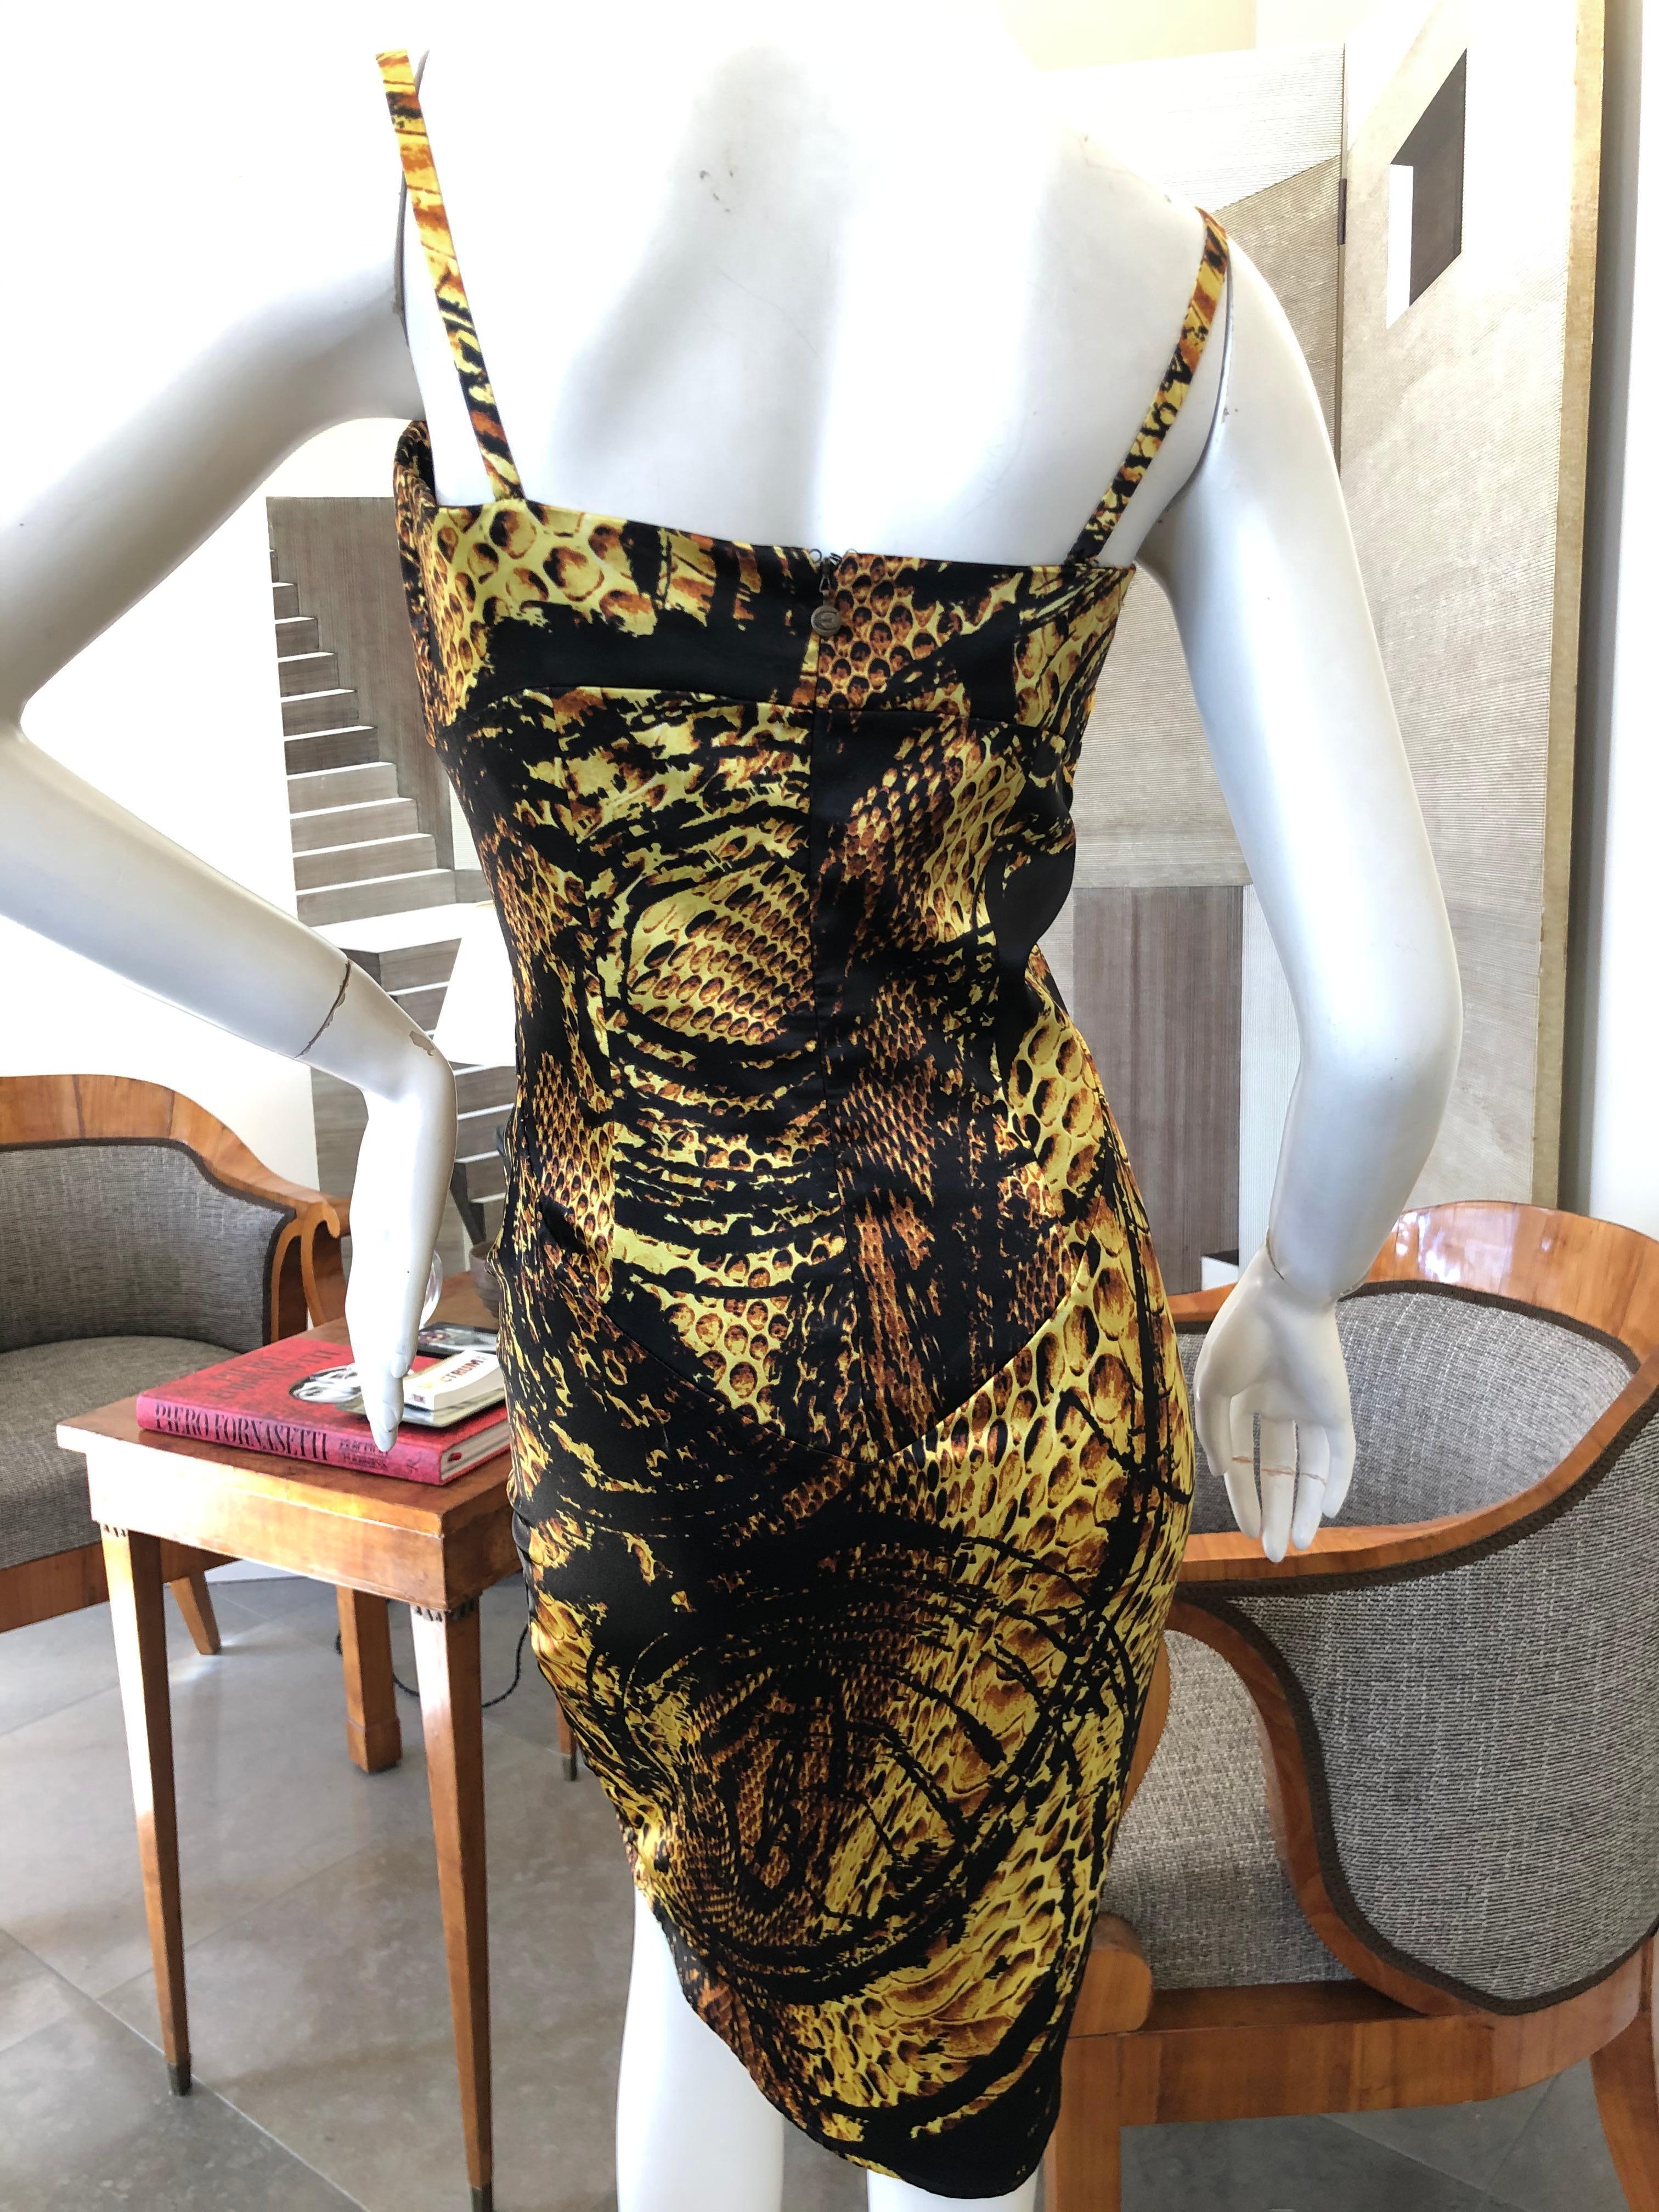 Roberto Cavalli Gold Reptile Print Cocktail Dress for Just Cavalli In Excellent Condition For Sale In Cloverdale, CA